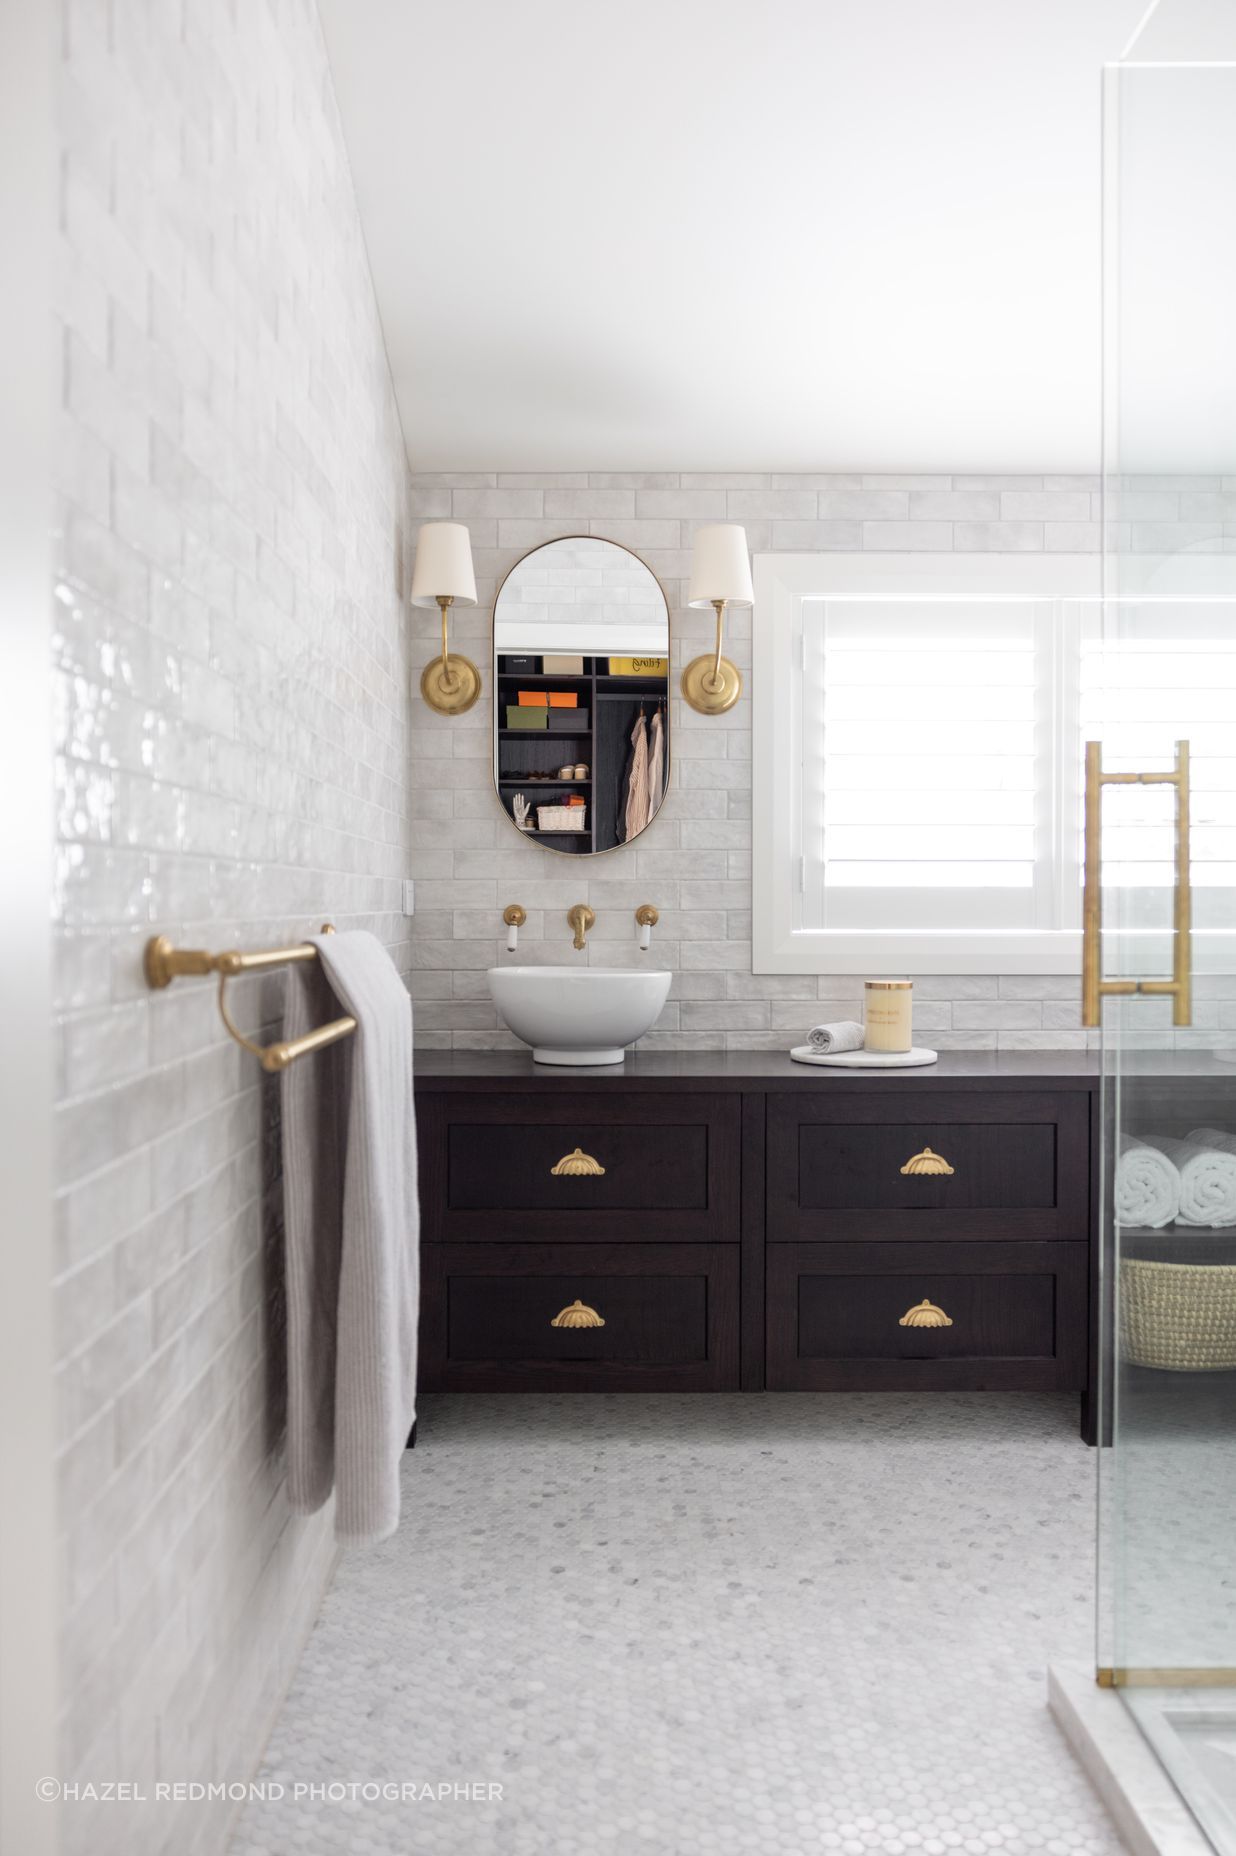 The ensuite feels bright and open, with glossy white subway tiles adding a hint of texture to the walls.